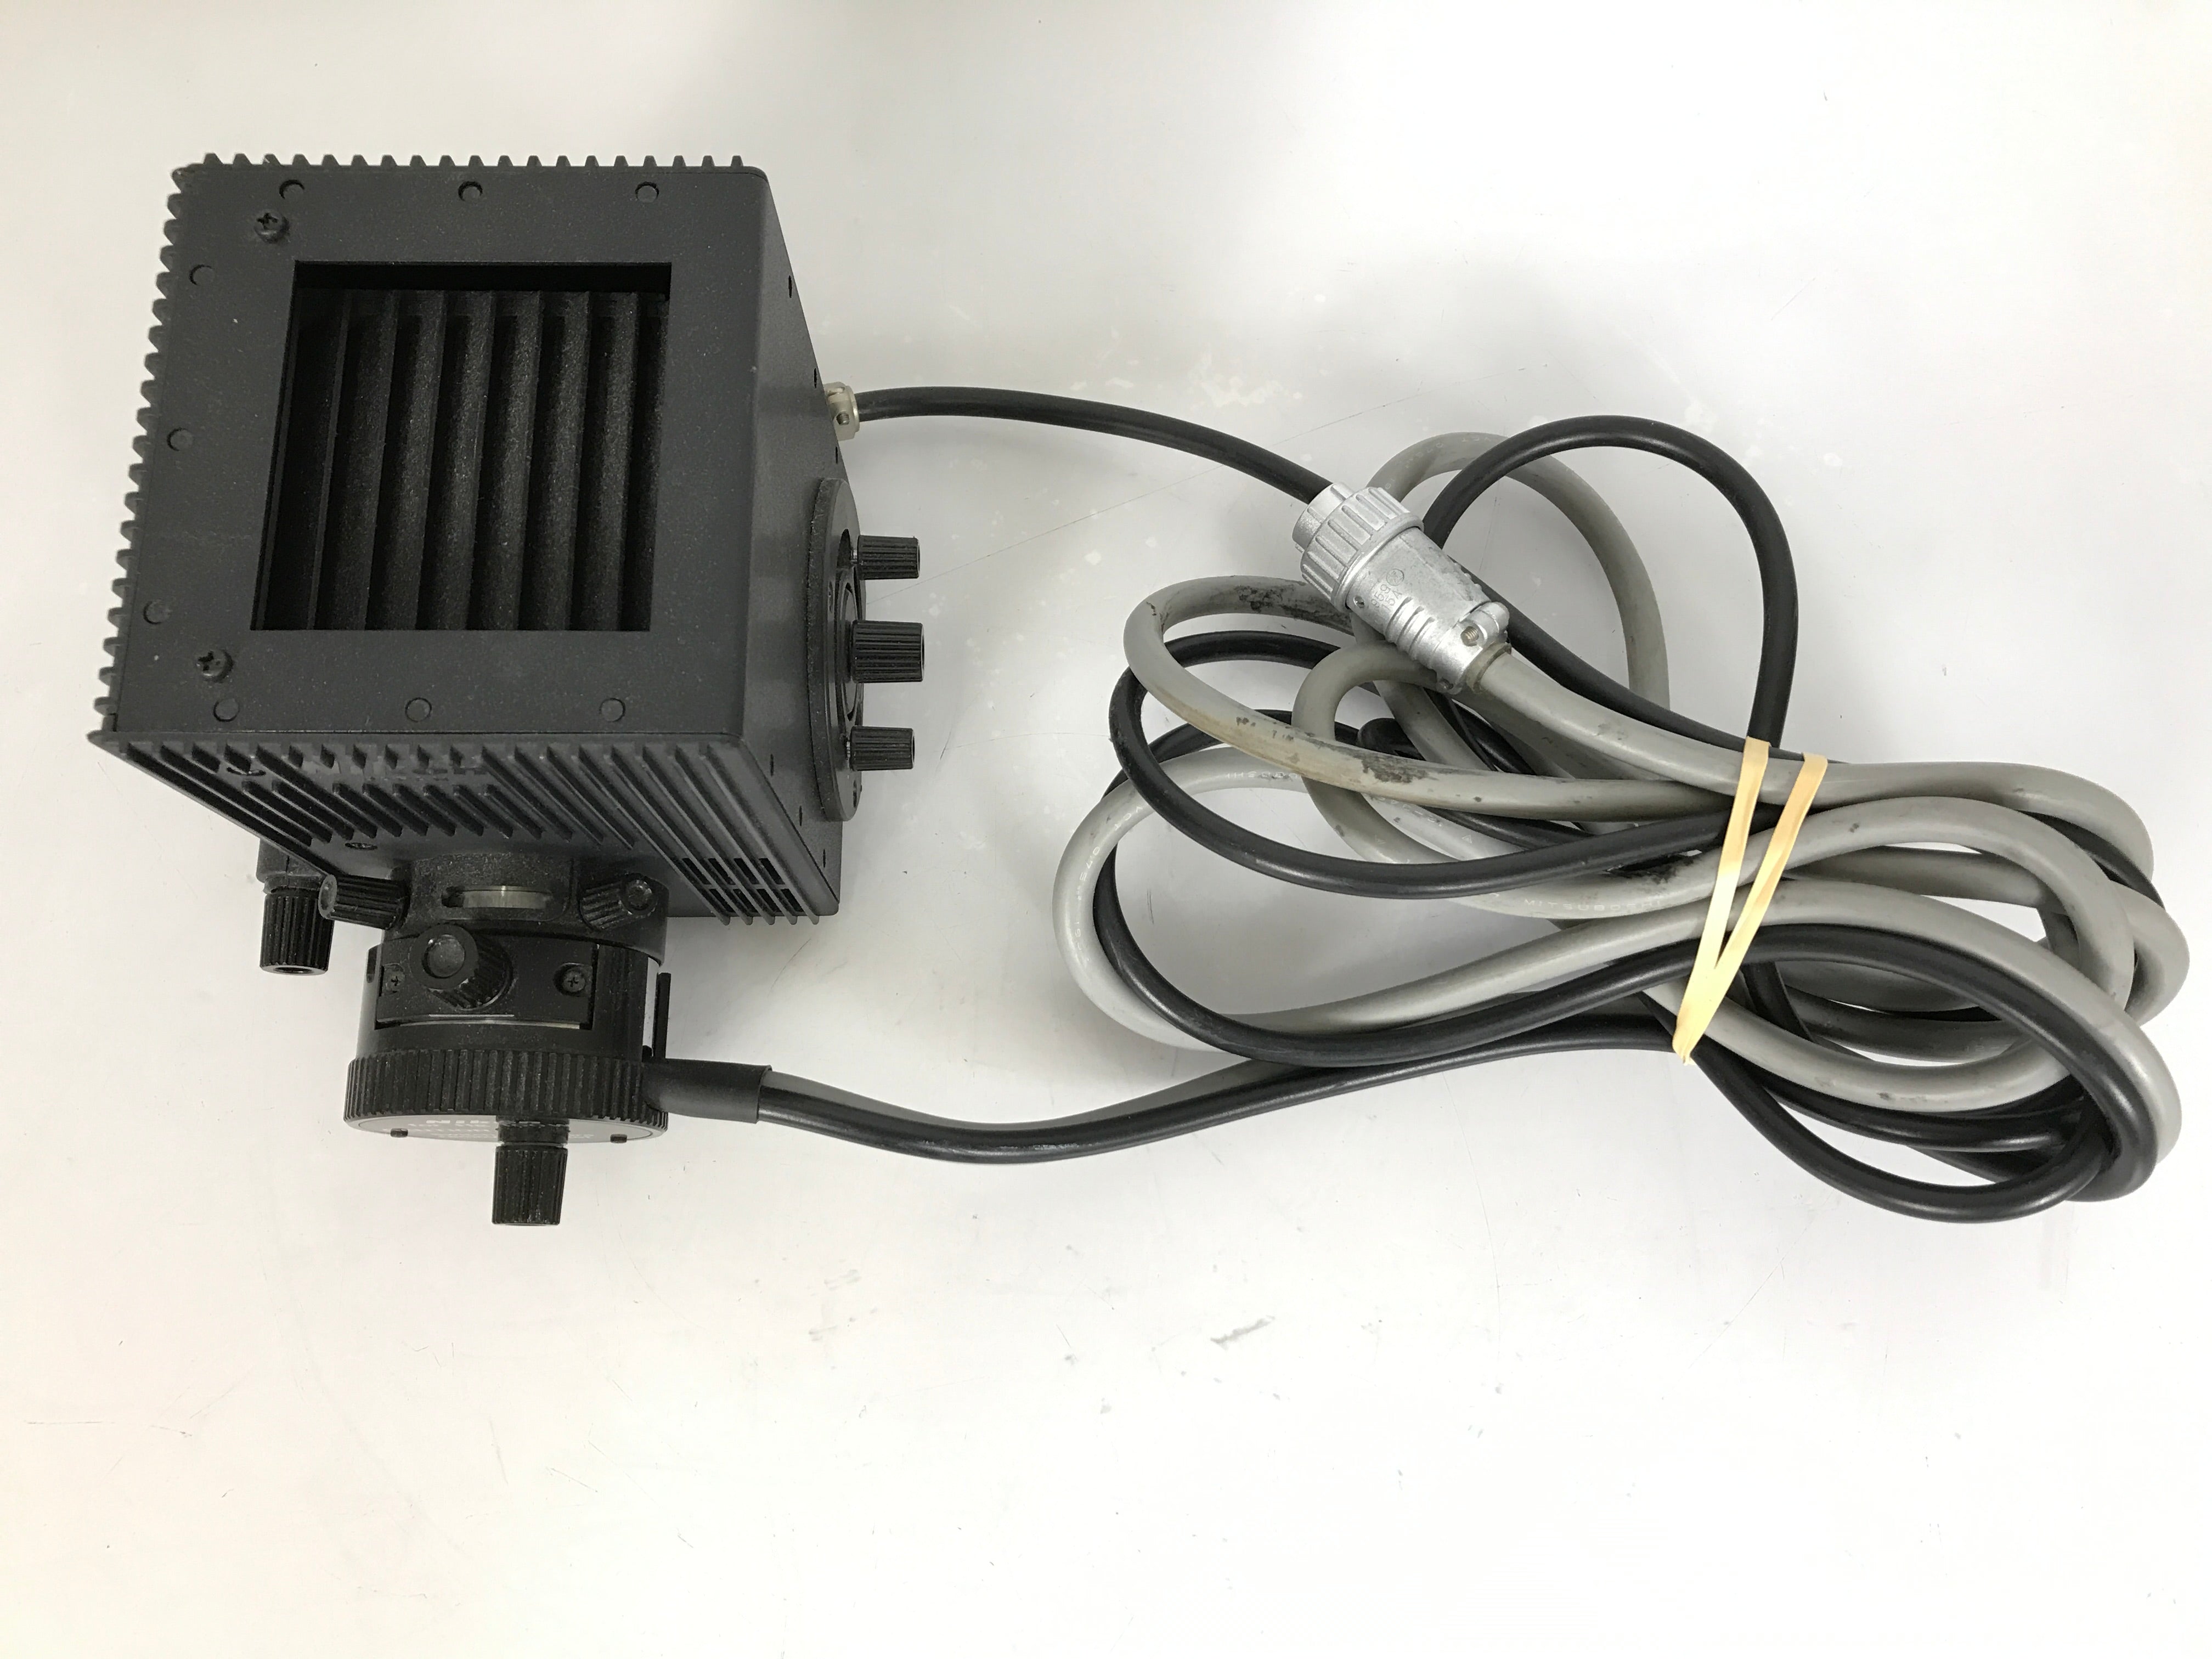 Nikon Hg 100W Lamp House for Diaphot Microscope *For Parts or Repair*